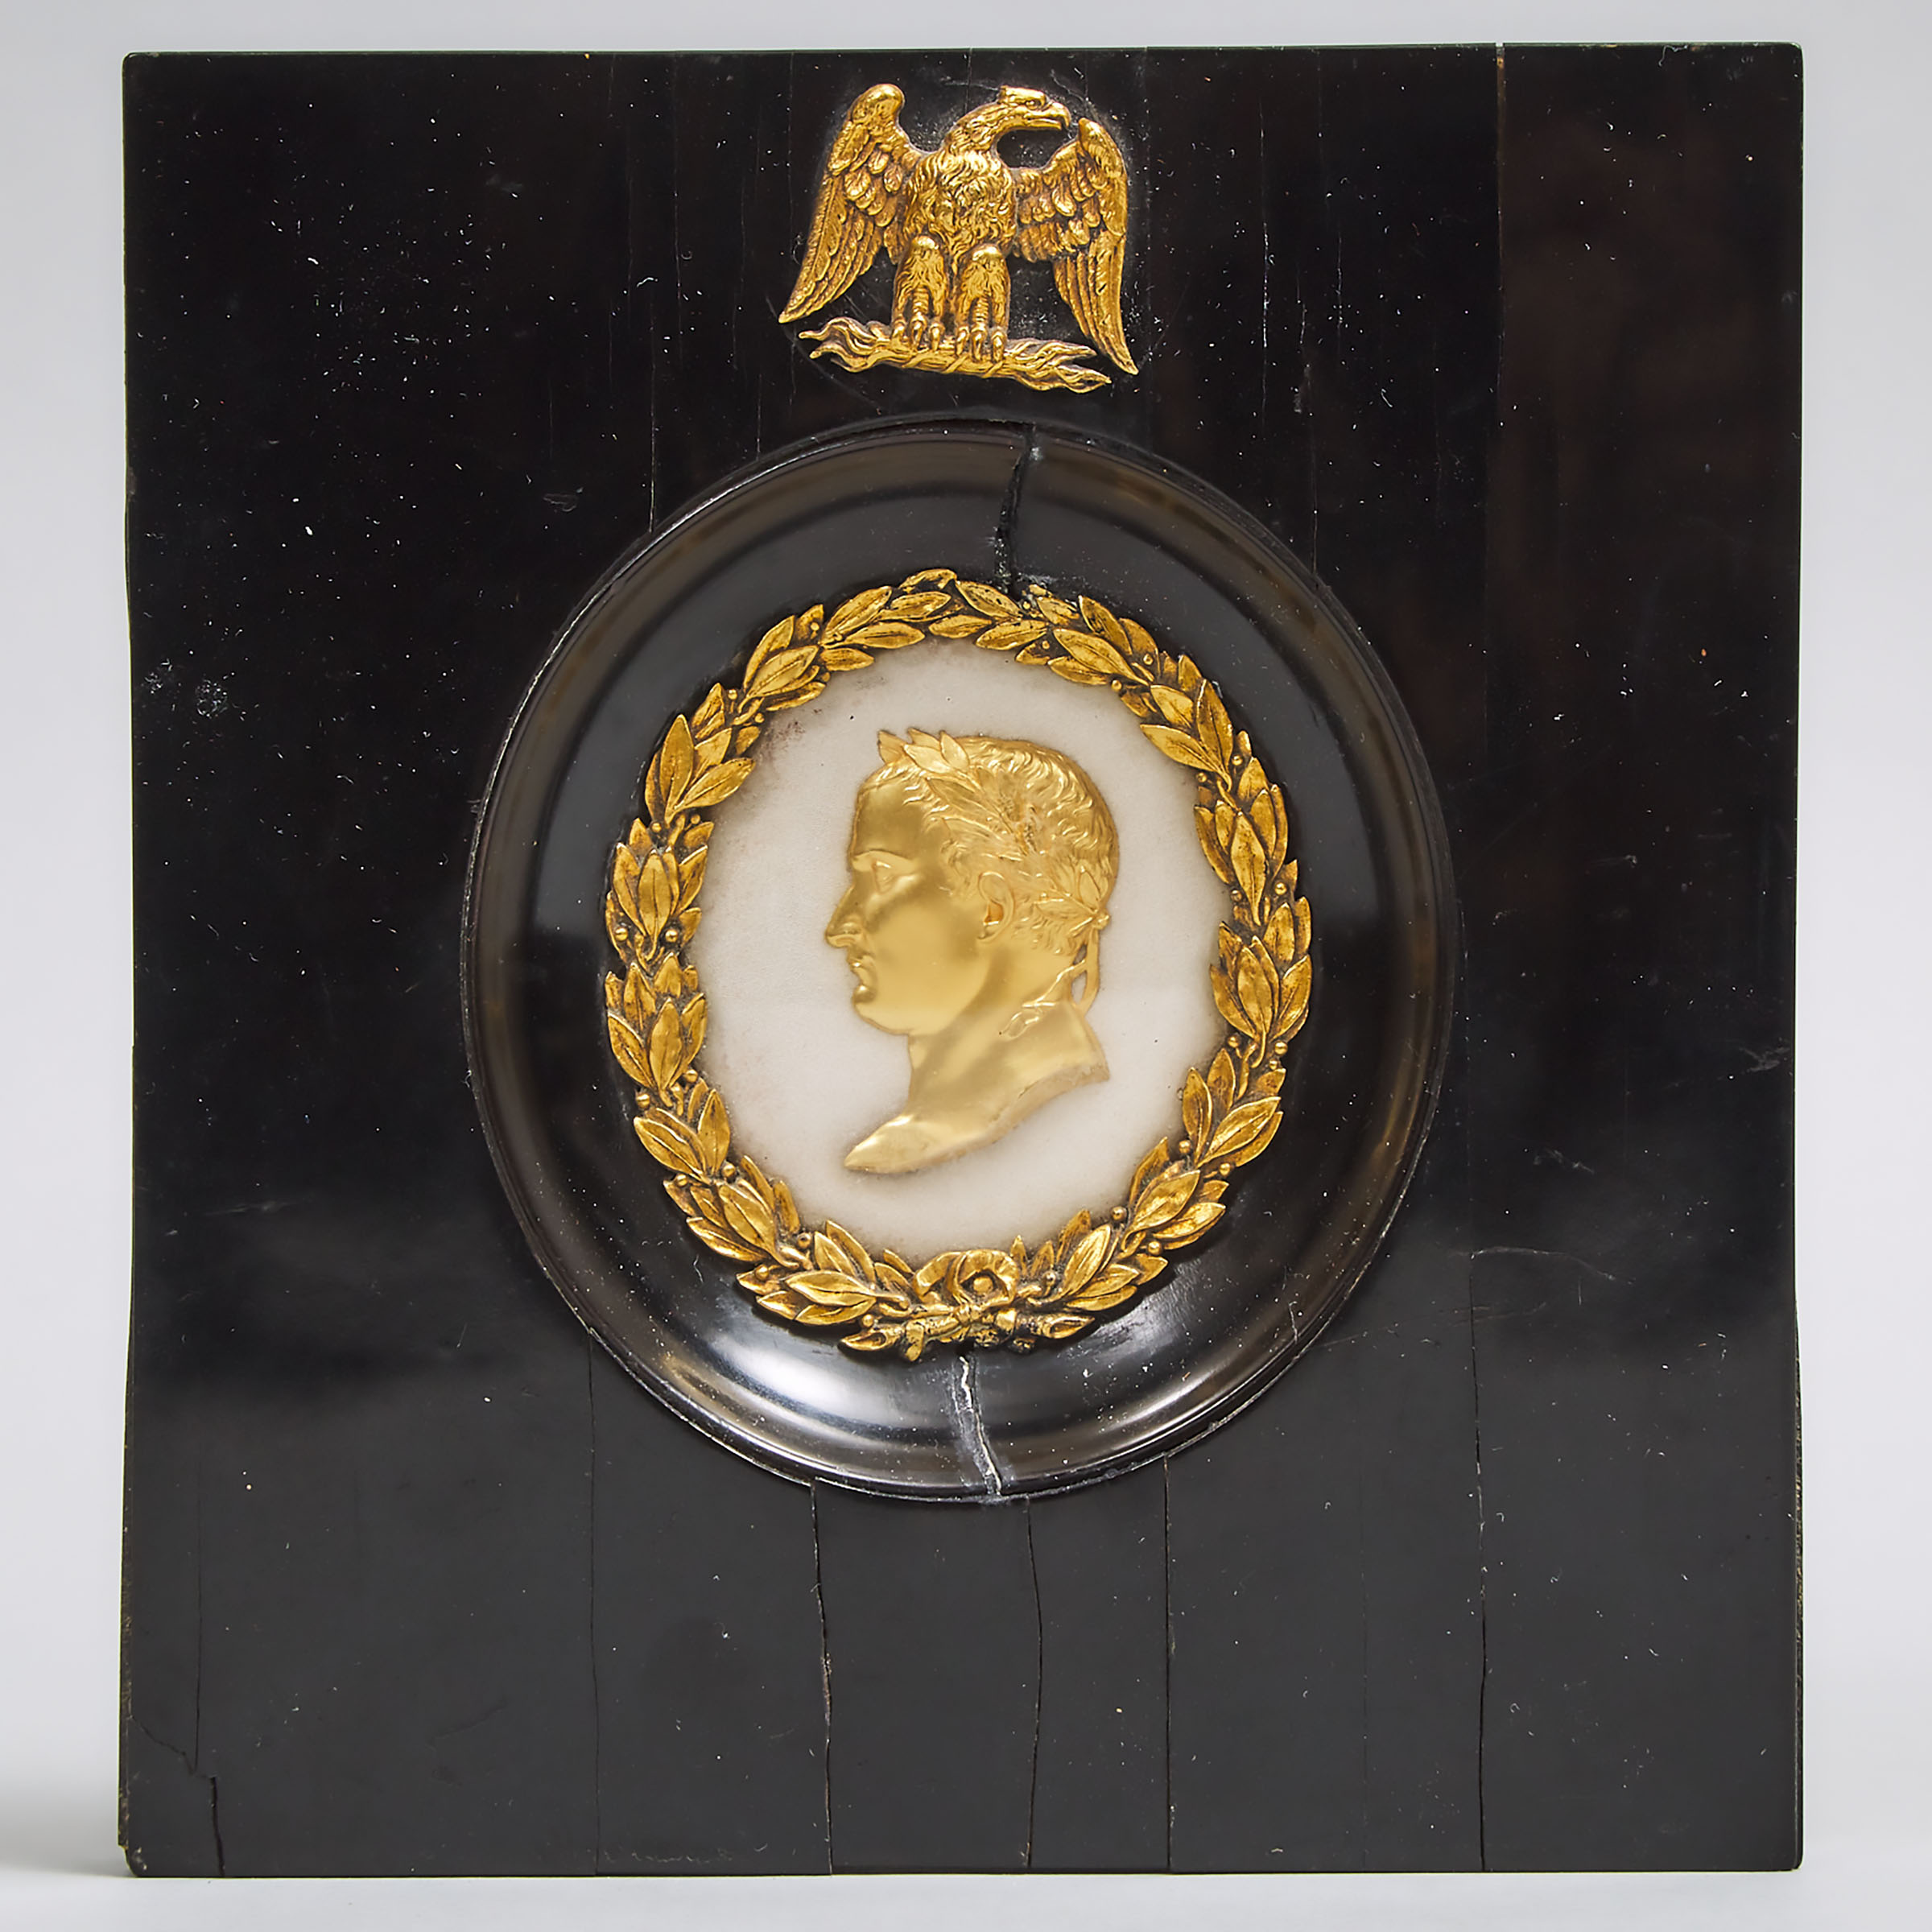 French Gilt Bronze Profile Relief Portrait of Napoleon I as Emperor, early-mid 19th century